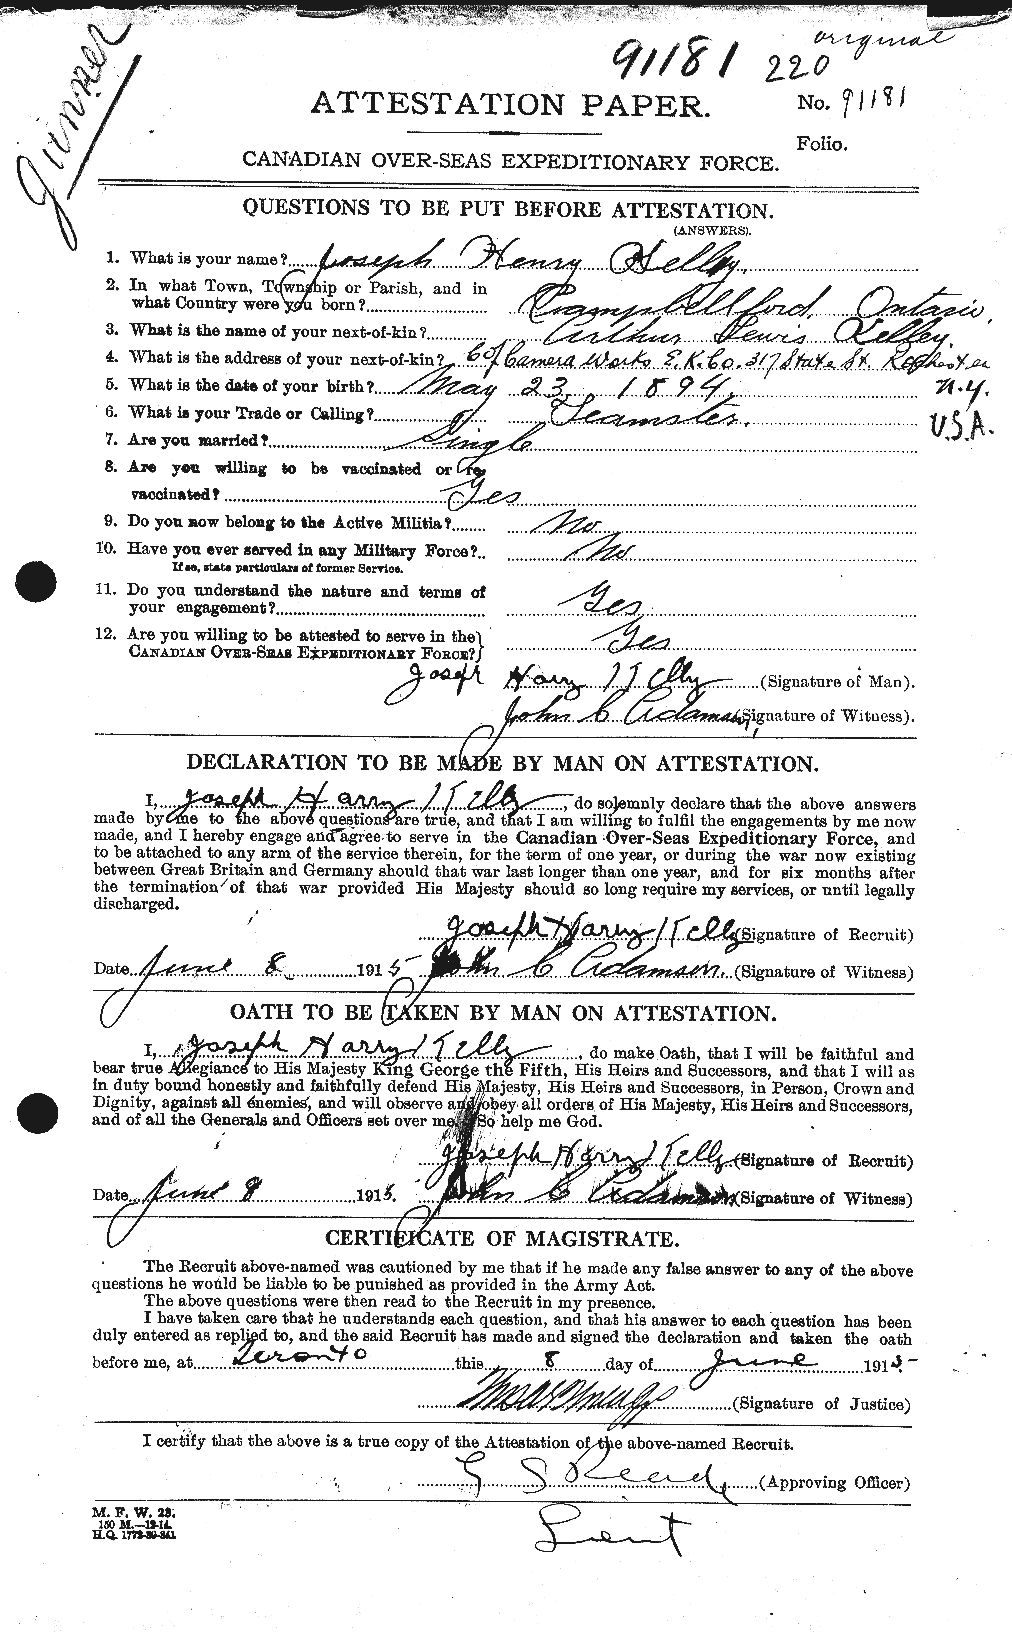 Personnel Records of the First World War - CEF 433621a